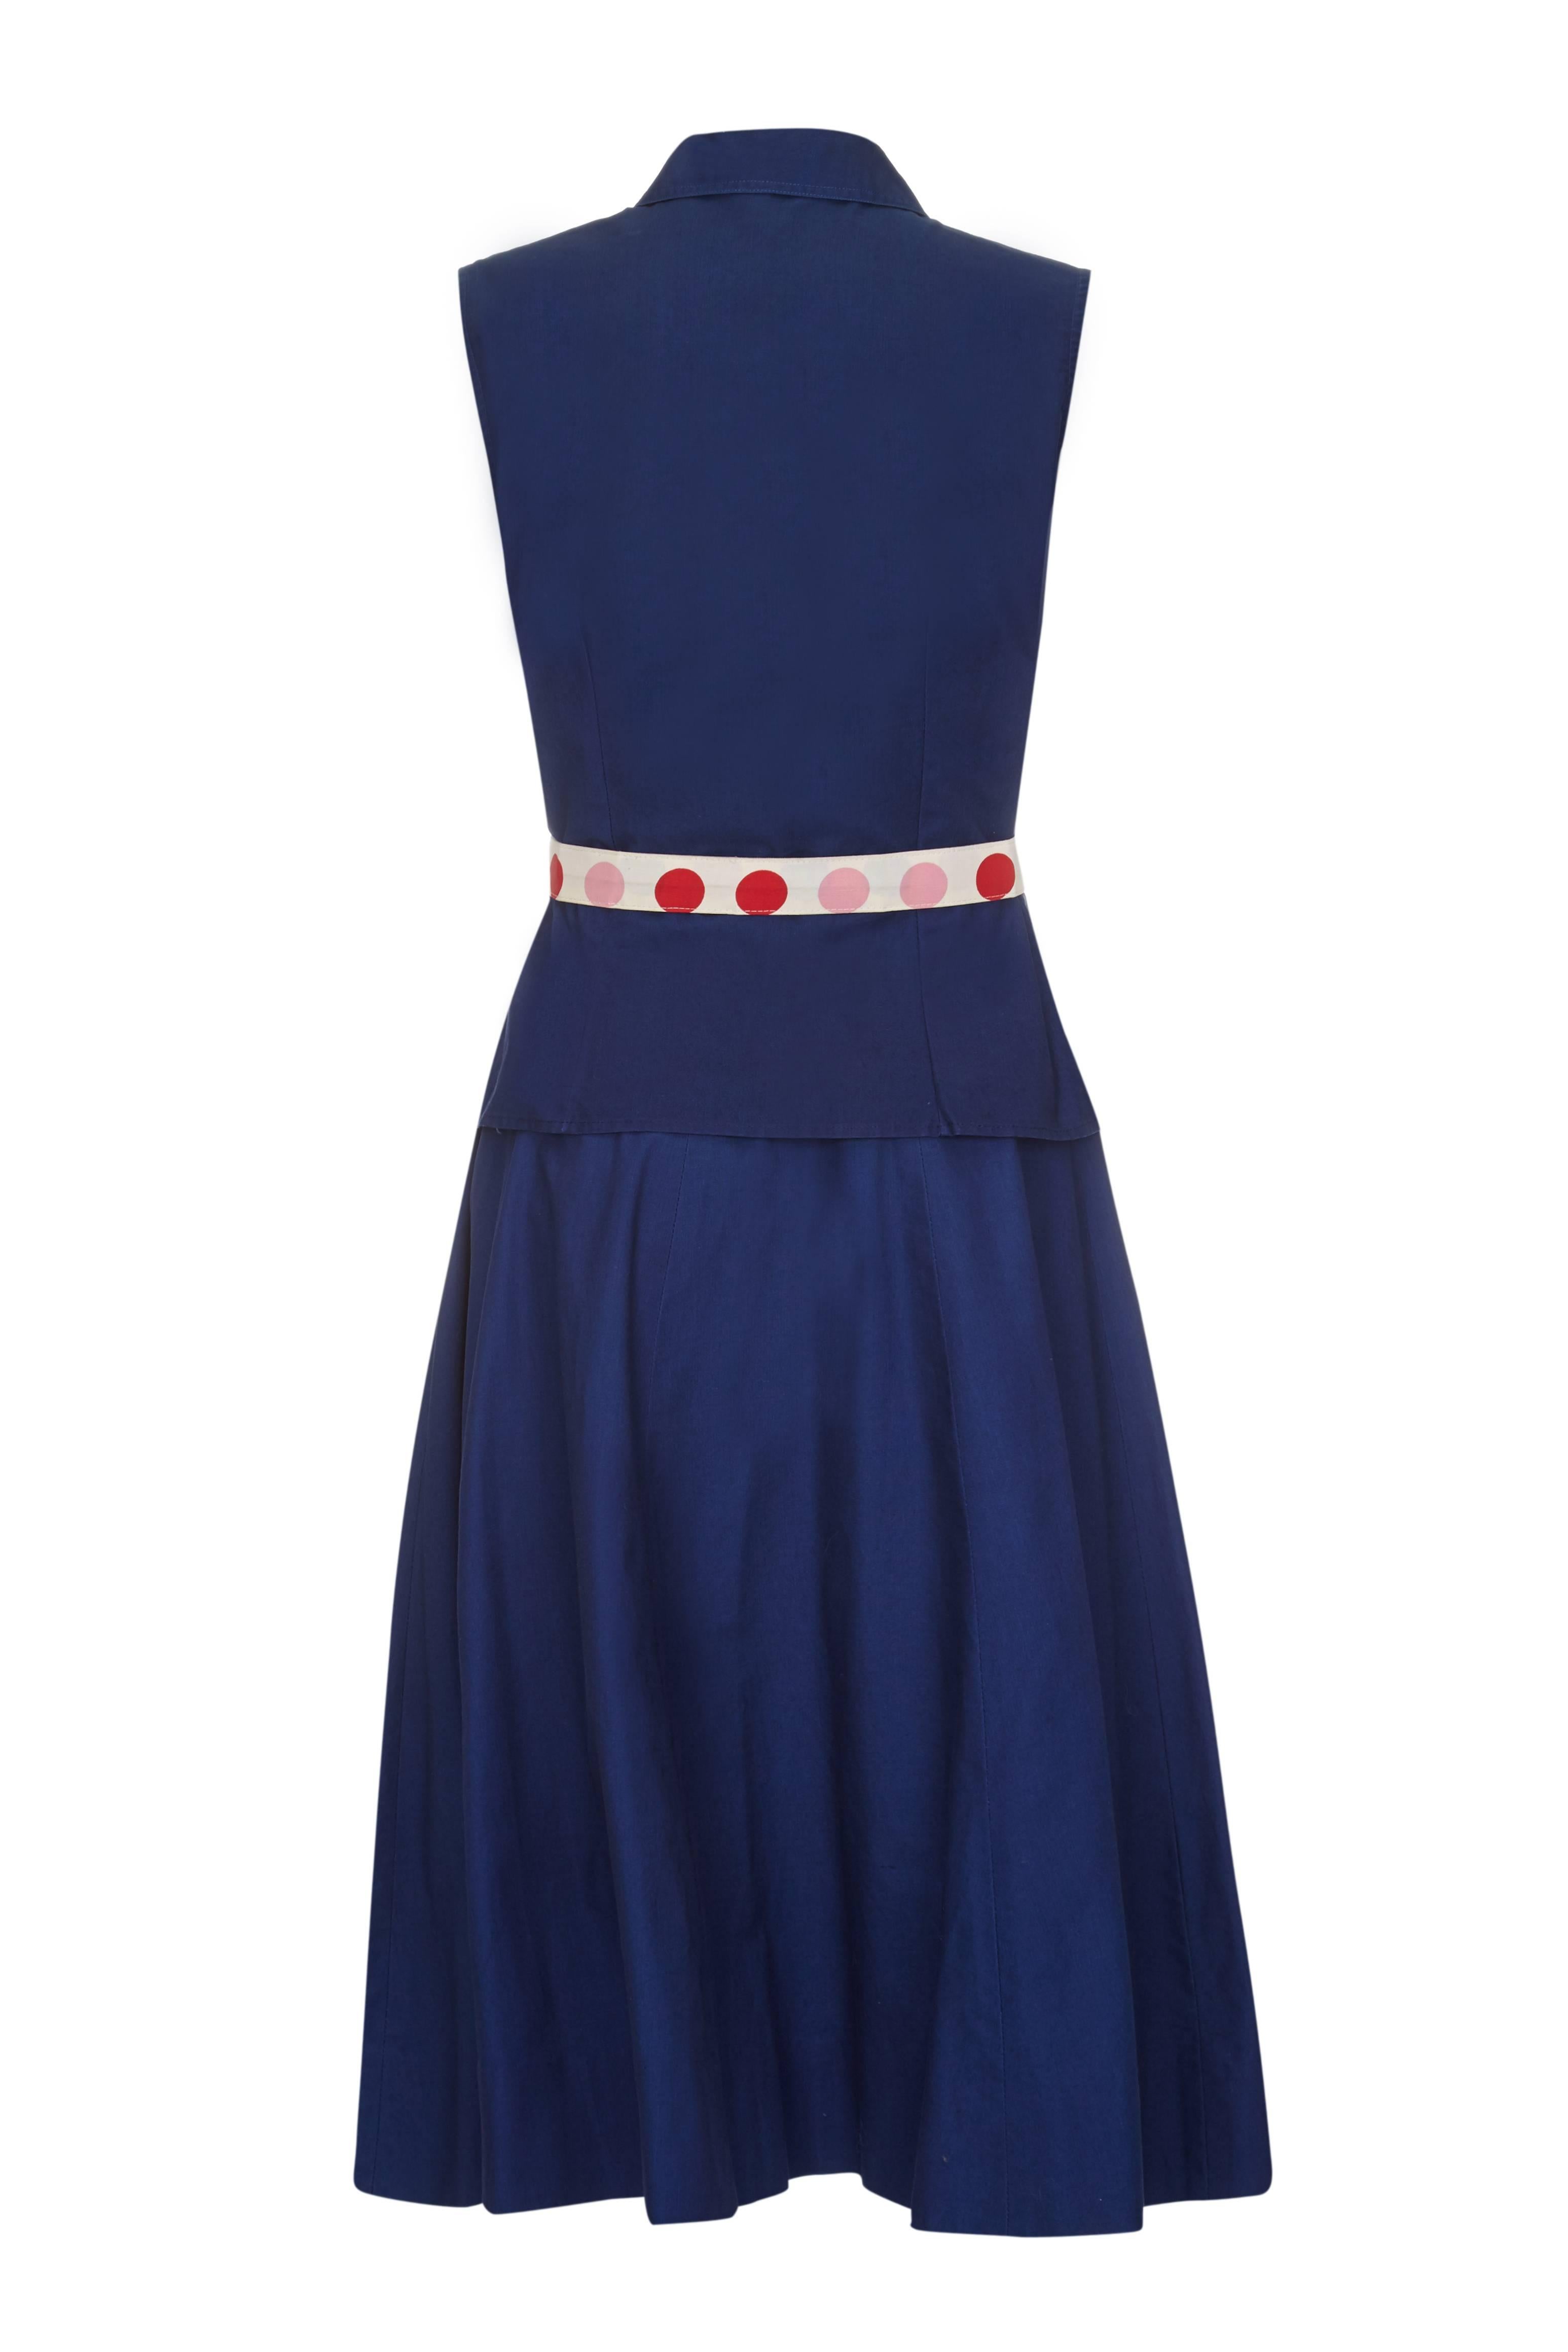 This charming 1950s navy blue cotton two piece skirt set is from popular American ready to wear designer Jonathan Logan and is in super vintage condition with some quirky details. The set is comprised of a sleeveless top and full ankle length skirt